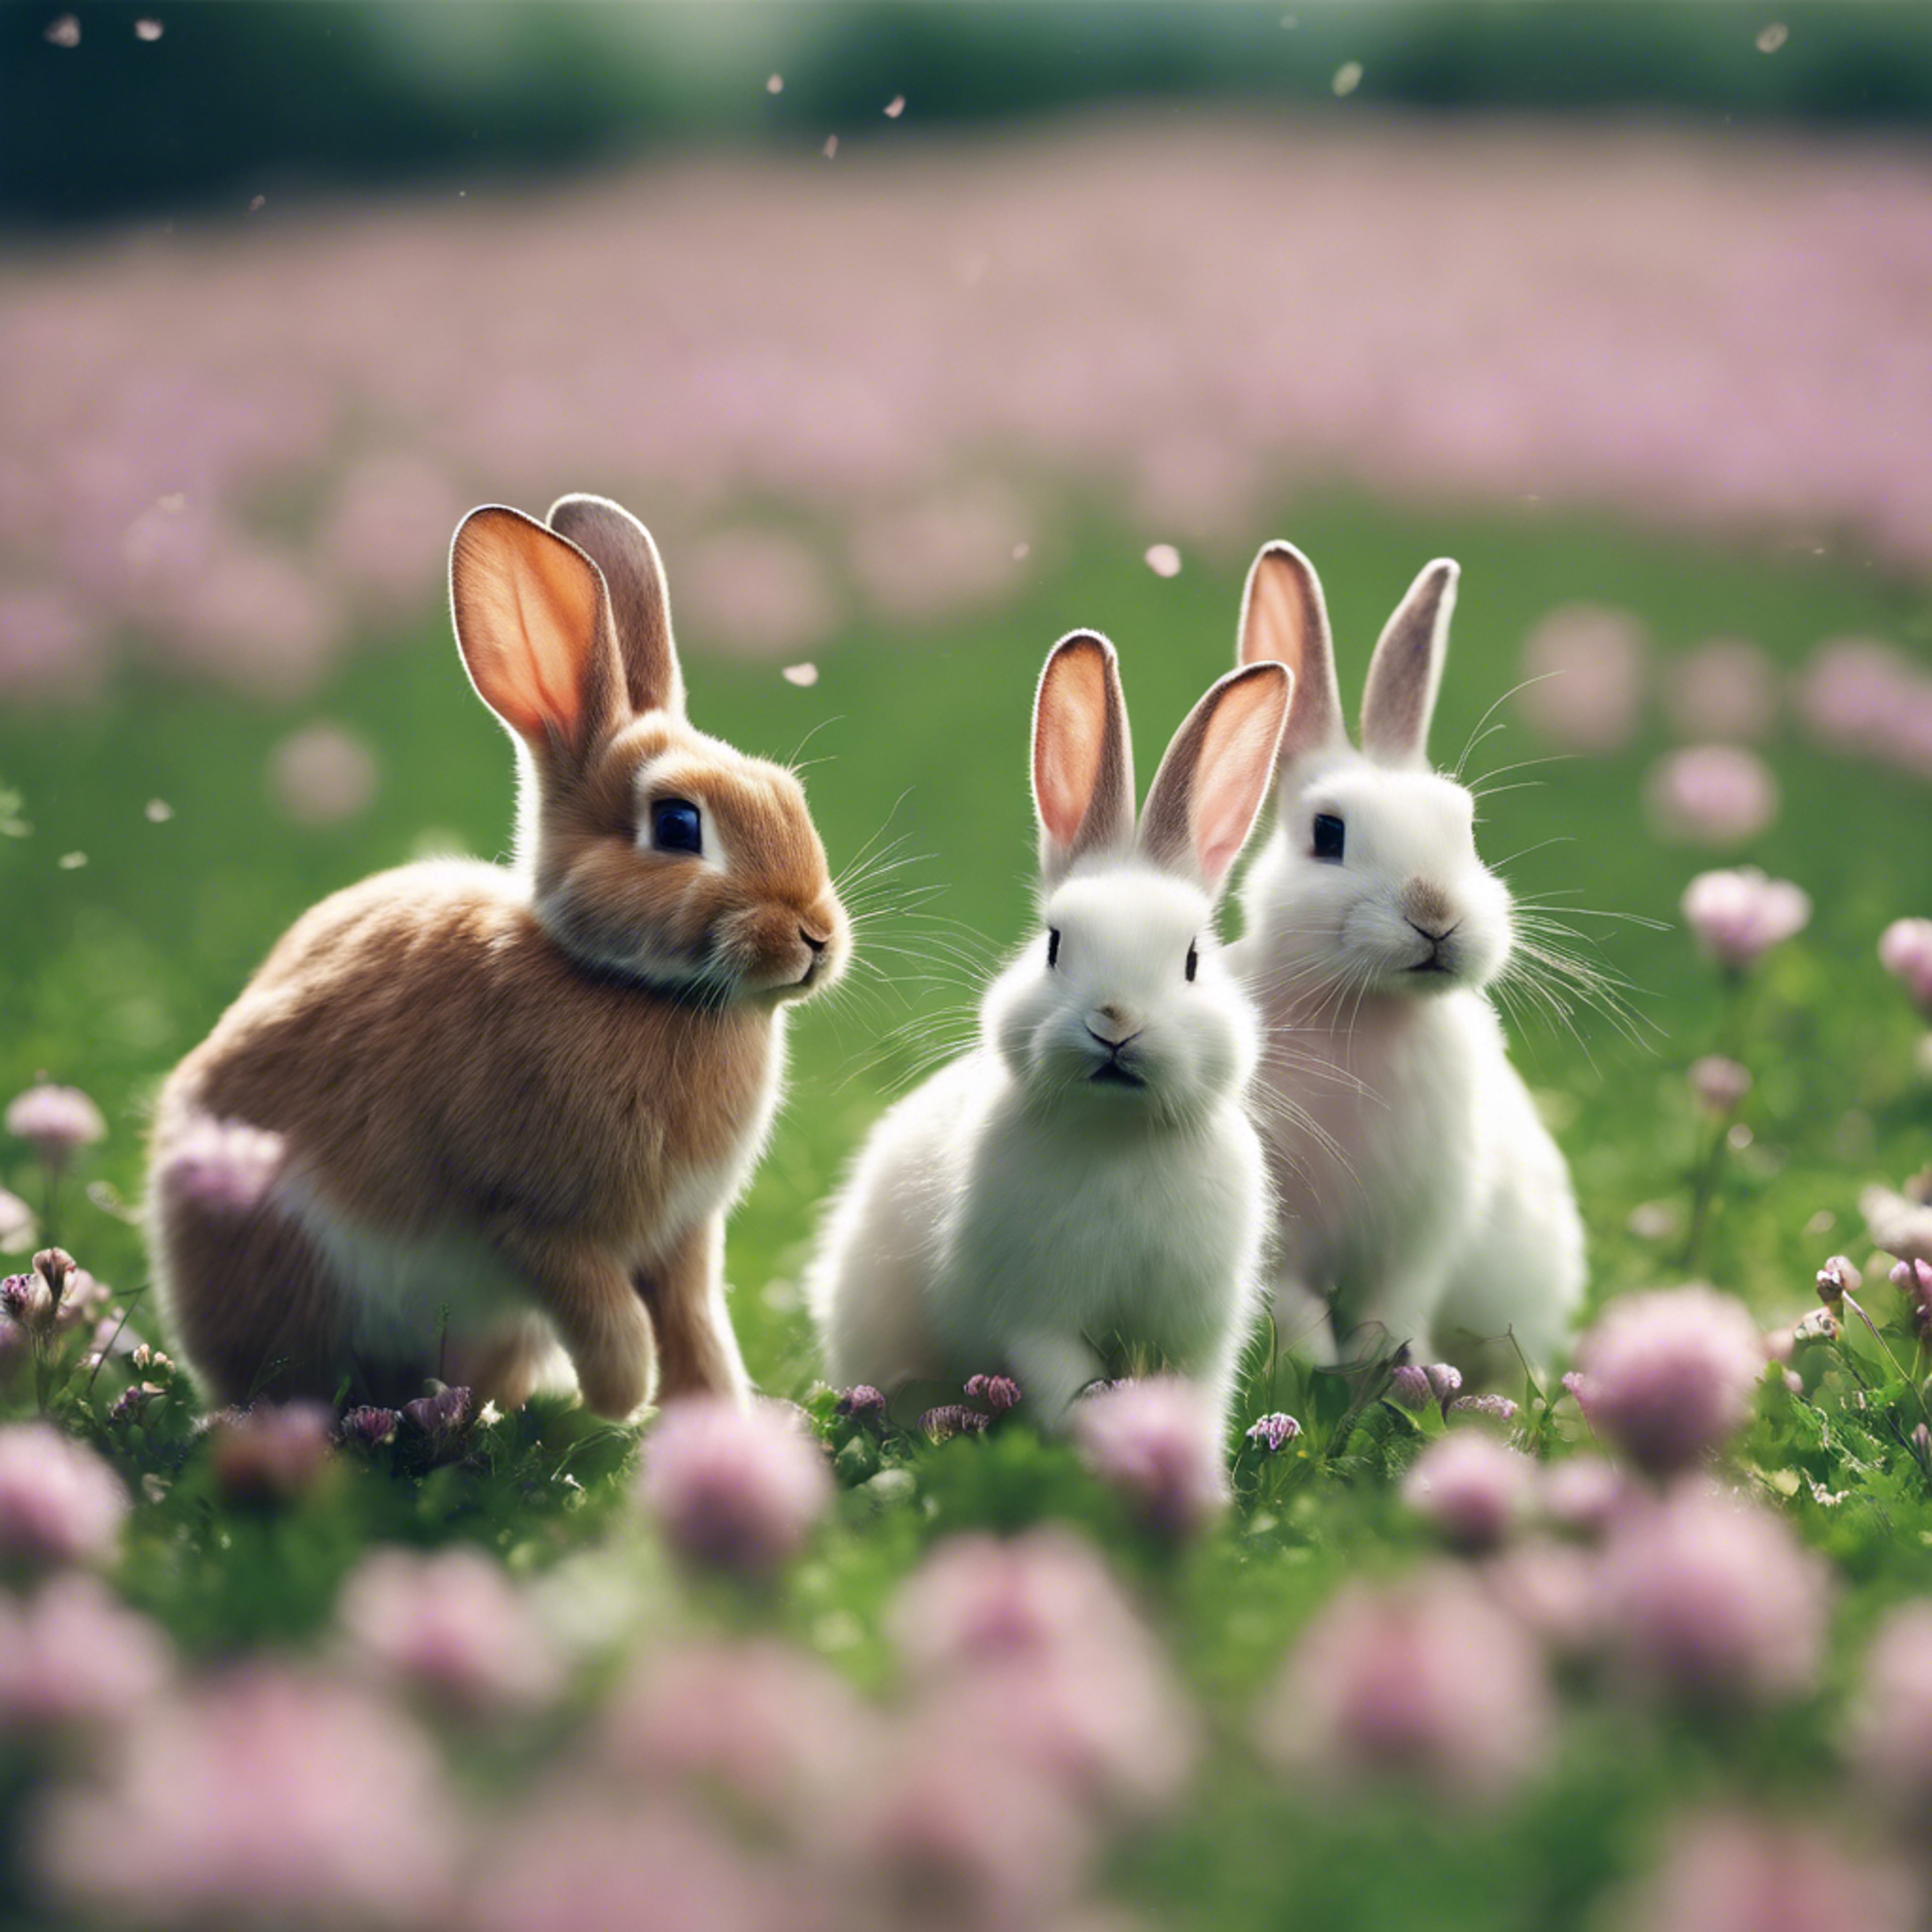 A group of rabbits playing tag in a clover field. 墙纸[610eb32603614430a4af]